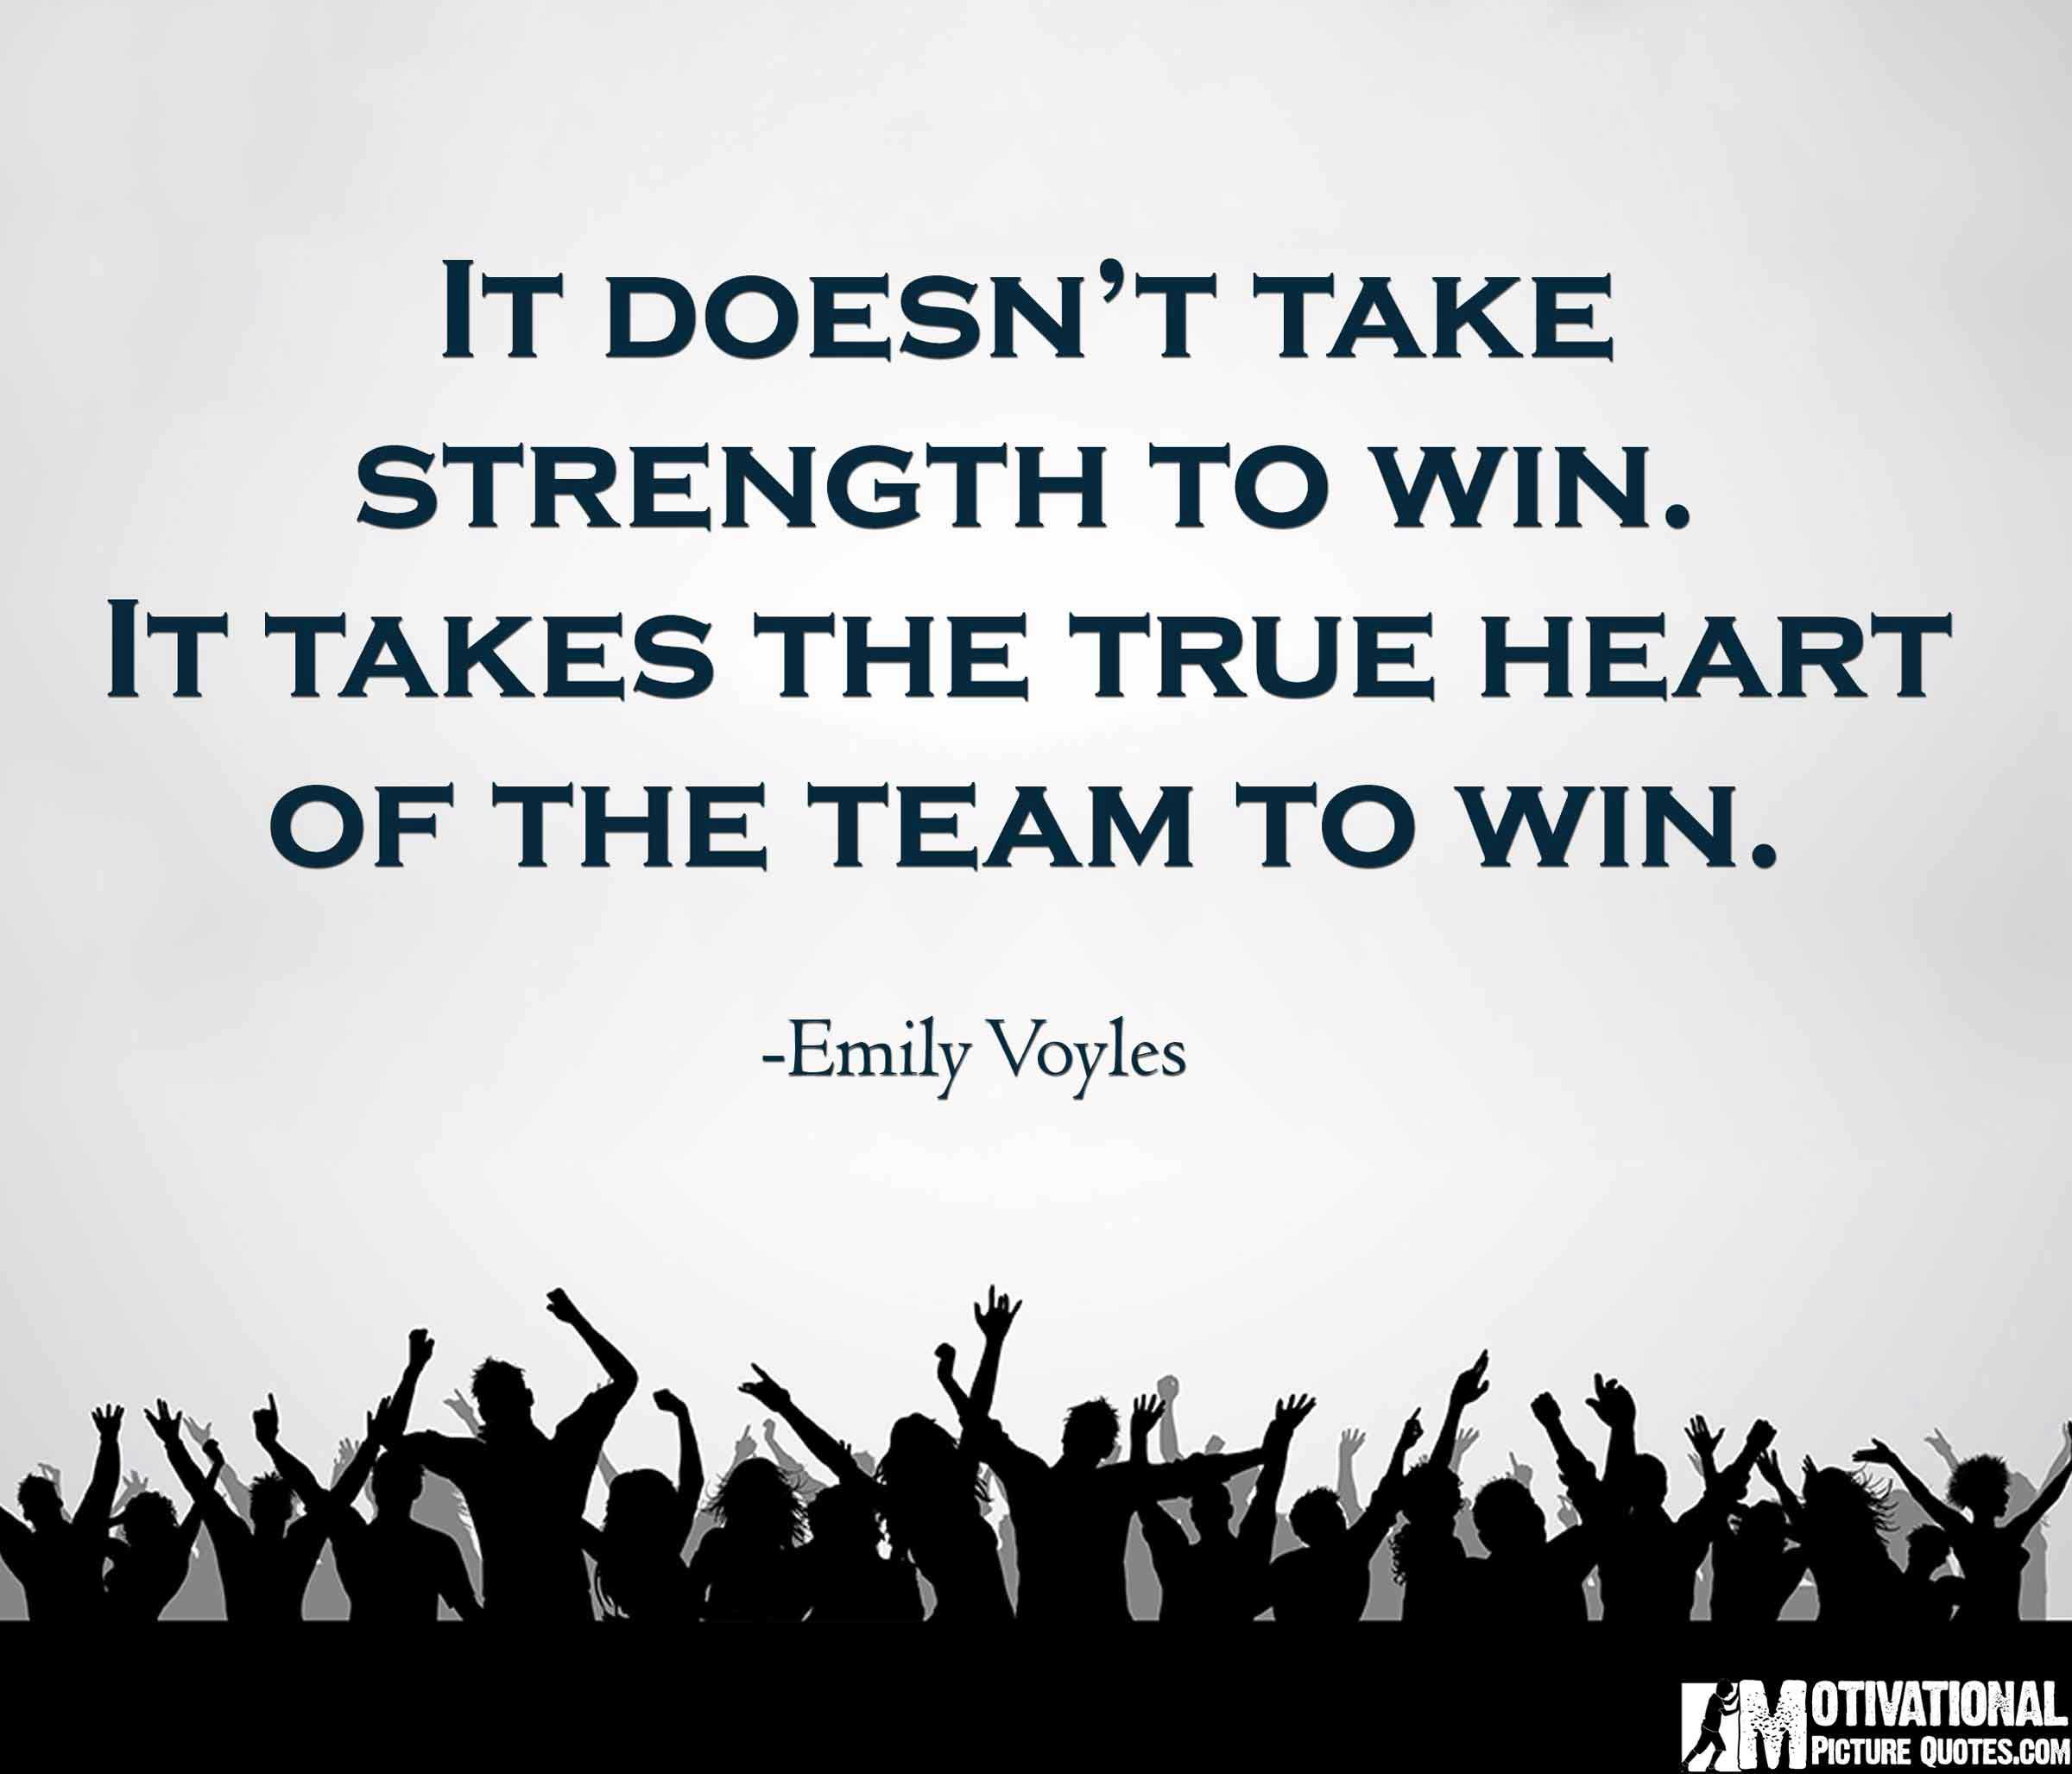 20+ Inspirational Team Quotes Images | Insbright